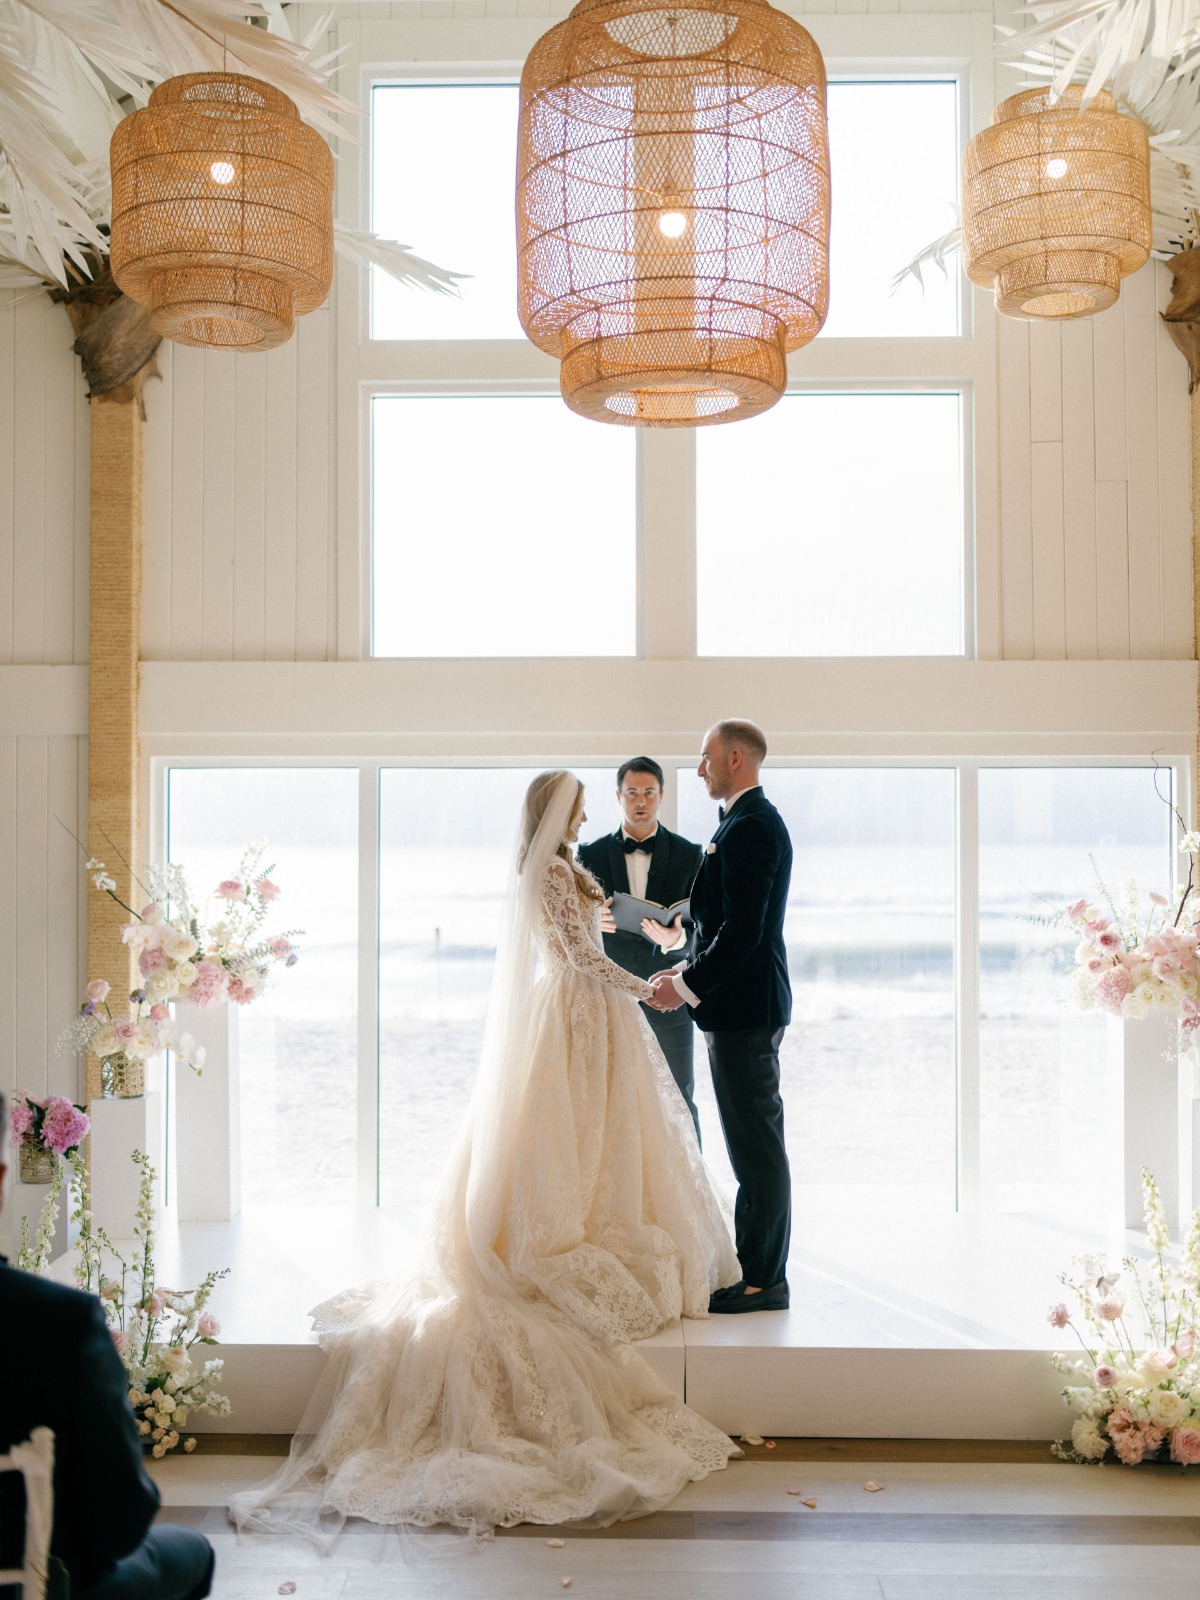 Bride and groom at ceremony in front of floor to ceiling windows